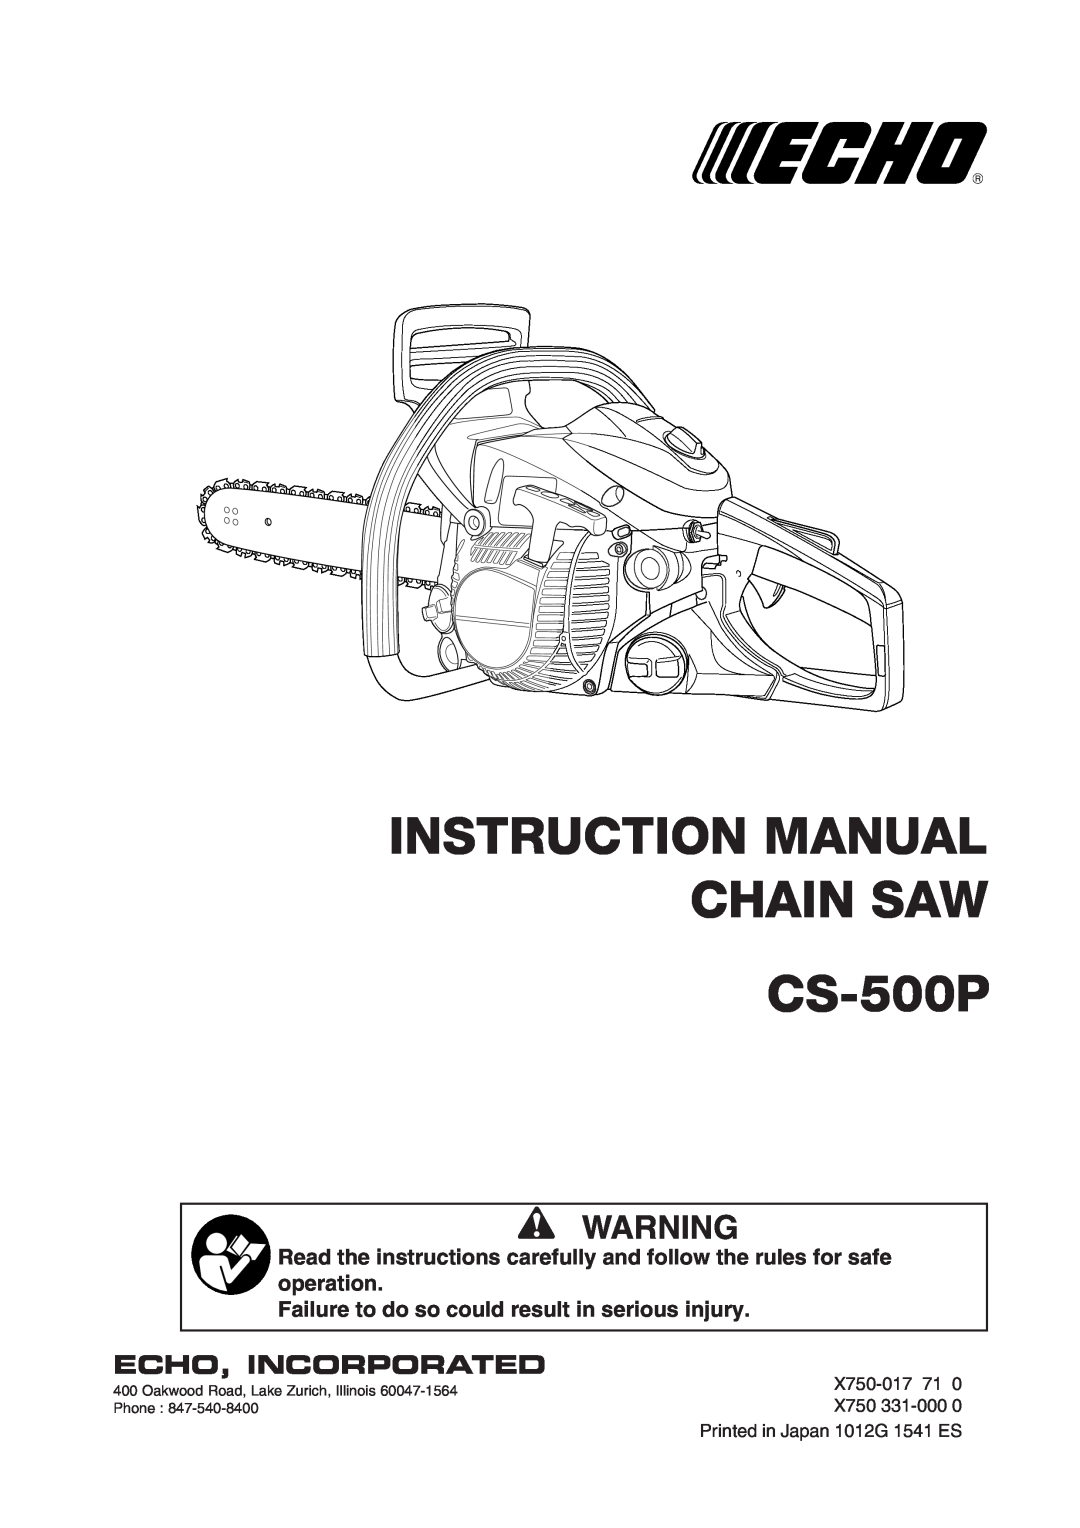 Echo CS-500P instruction manual Failure to do so could result in serious injury, Echo, Incorporated 